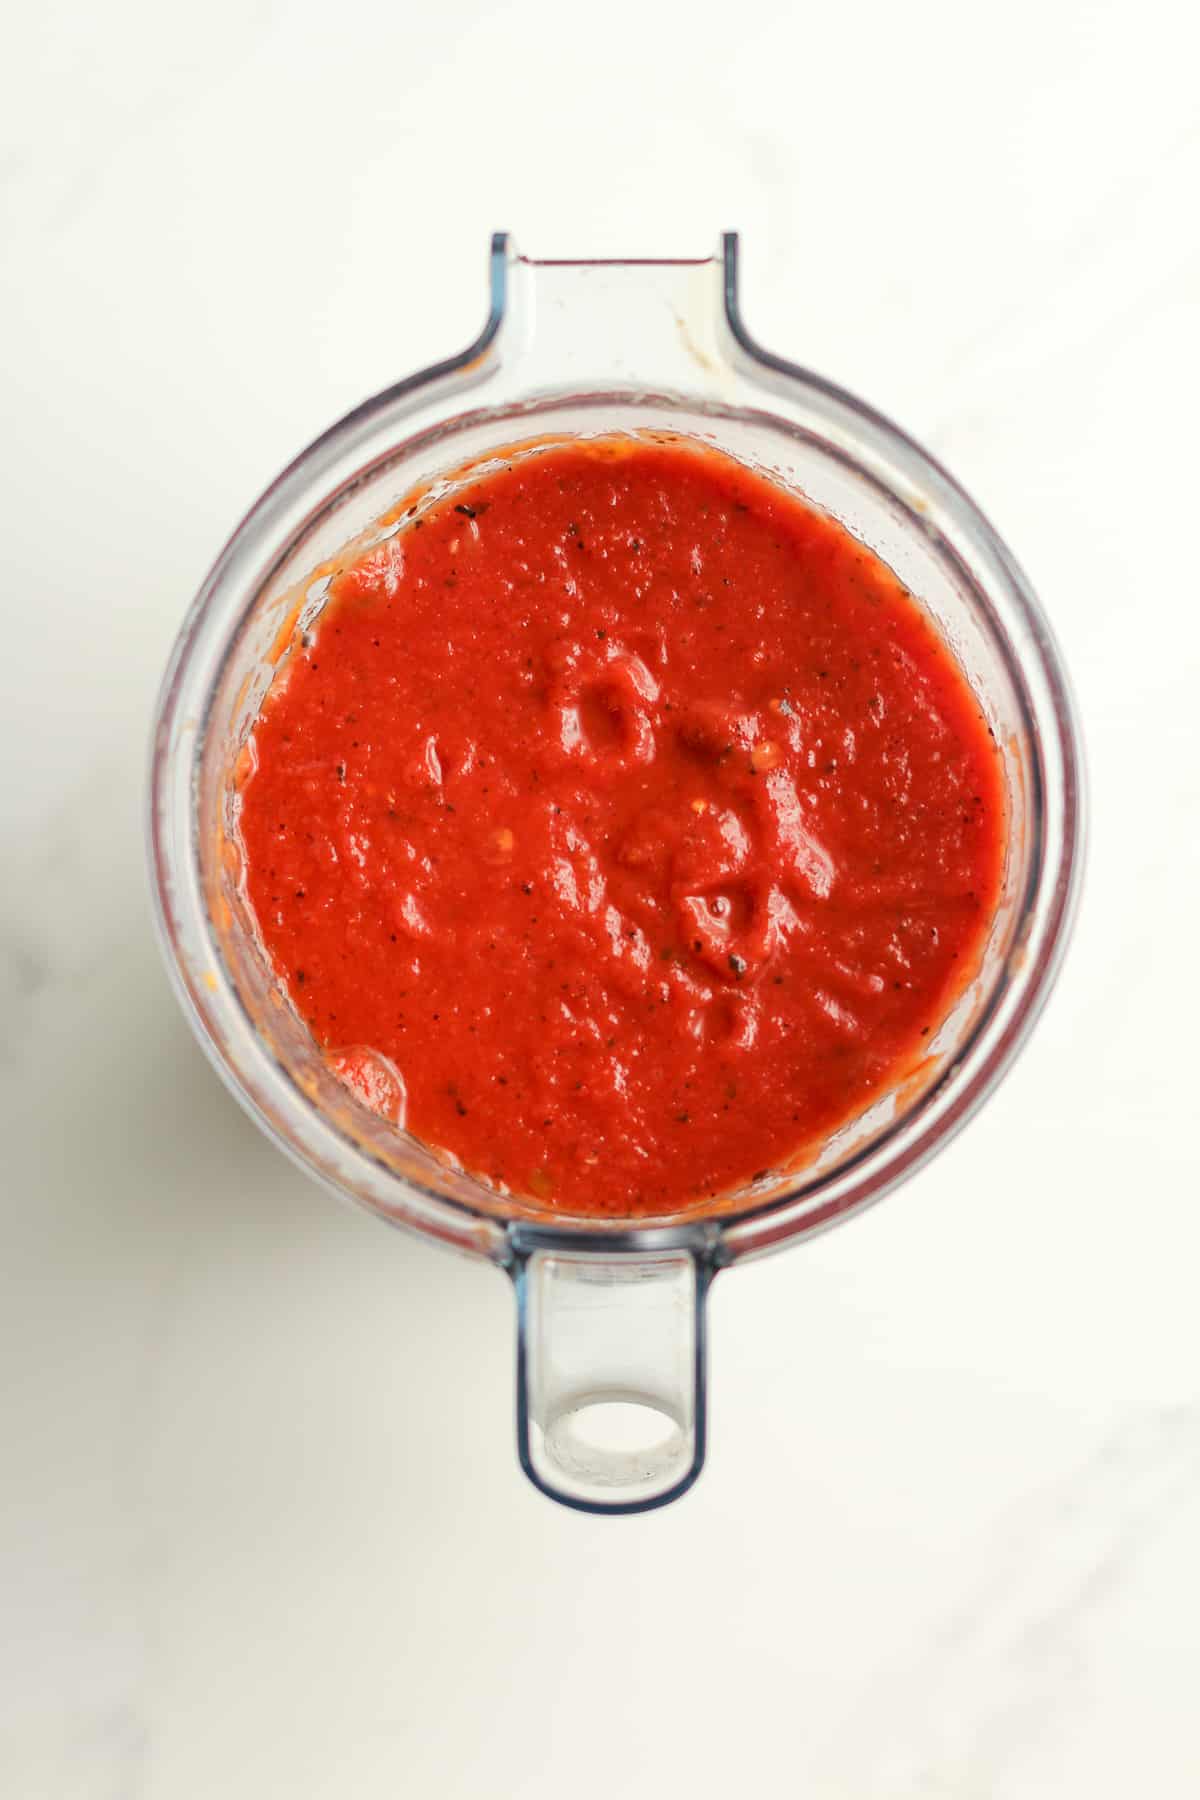 A blender with the just blended tomatoes.